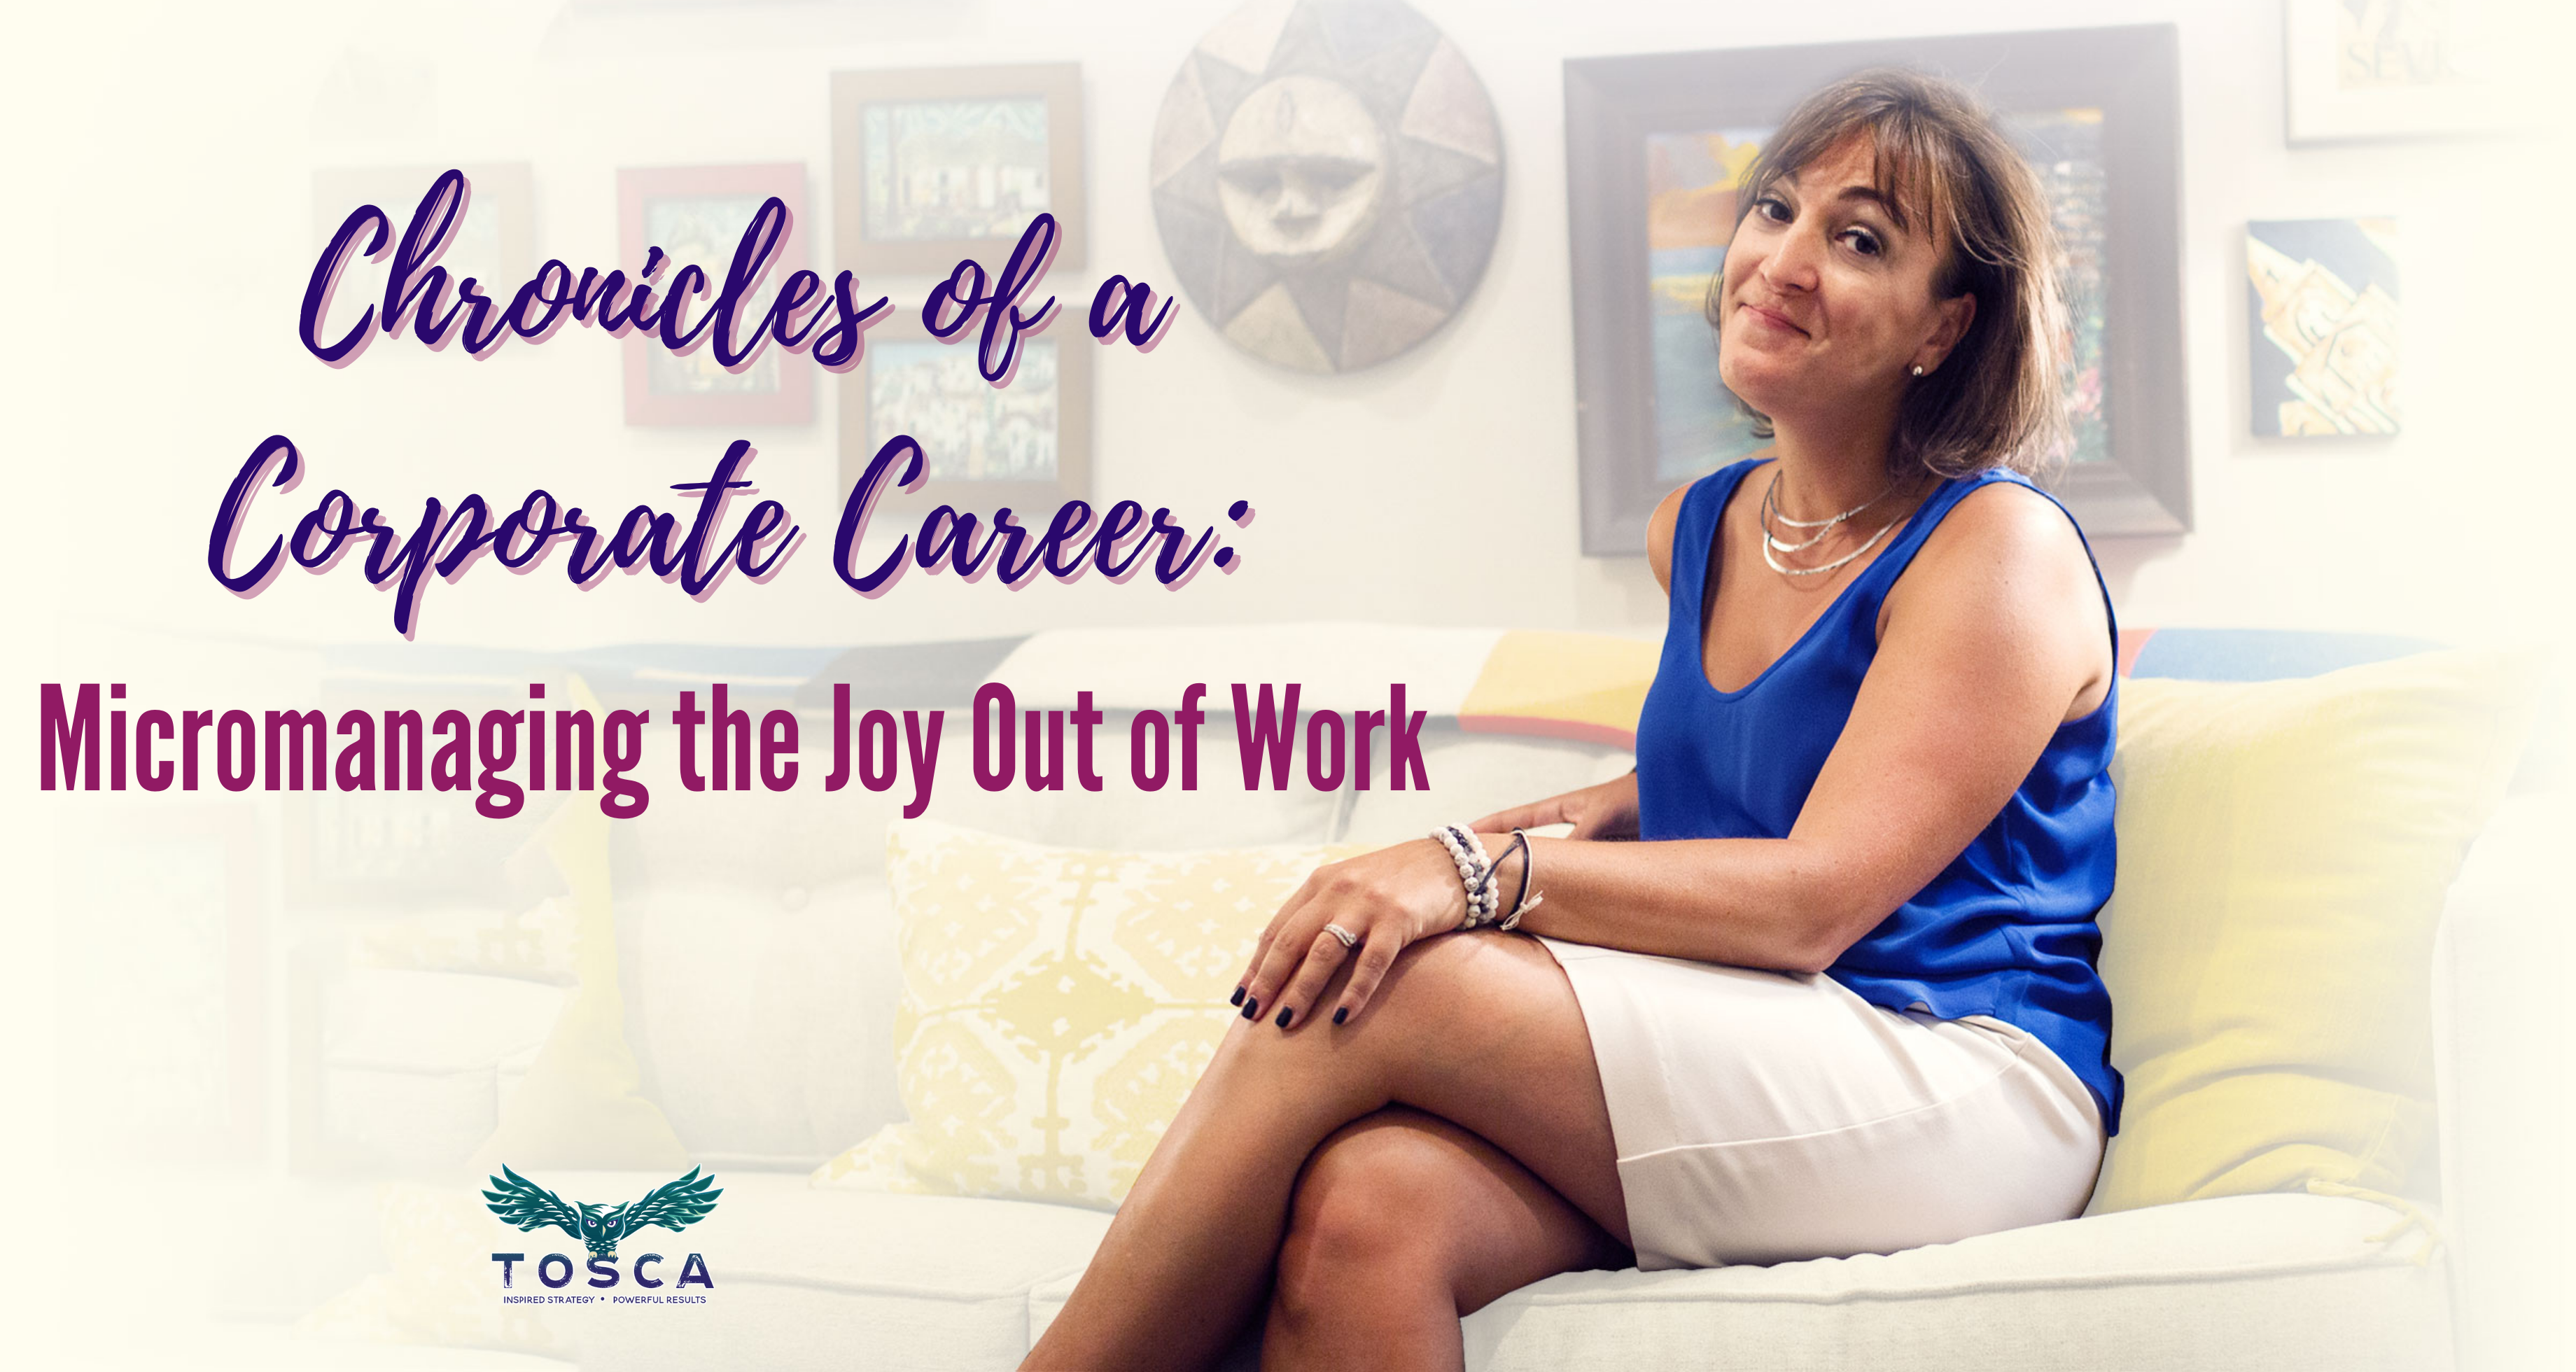 Chronicles of a Corporate Career: Micromanaging the Joy Out of Work